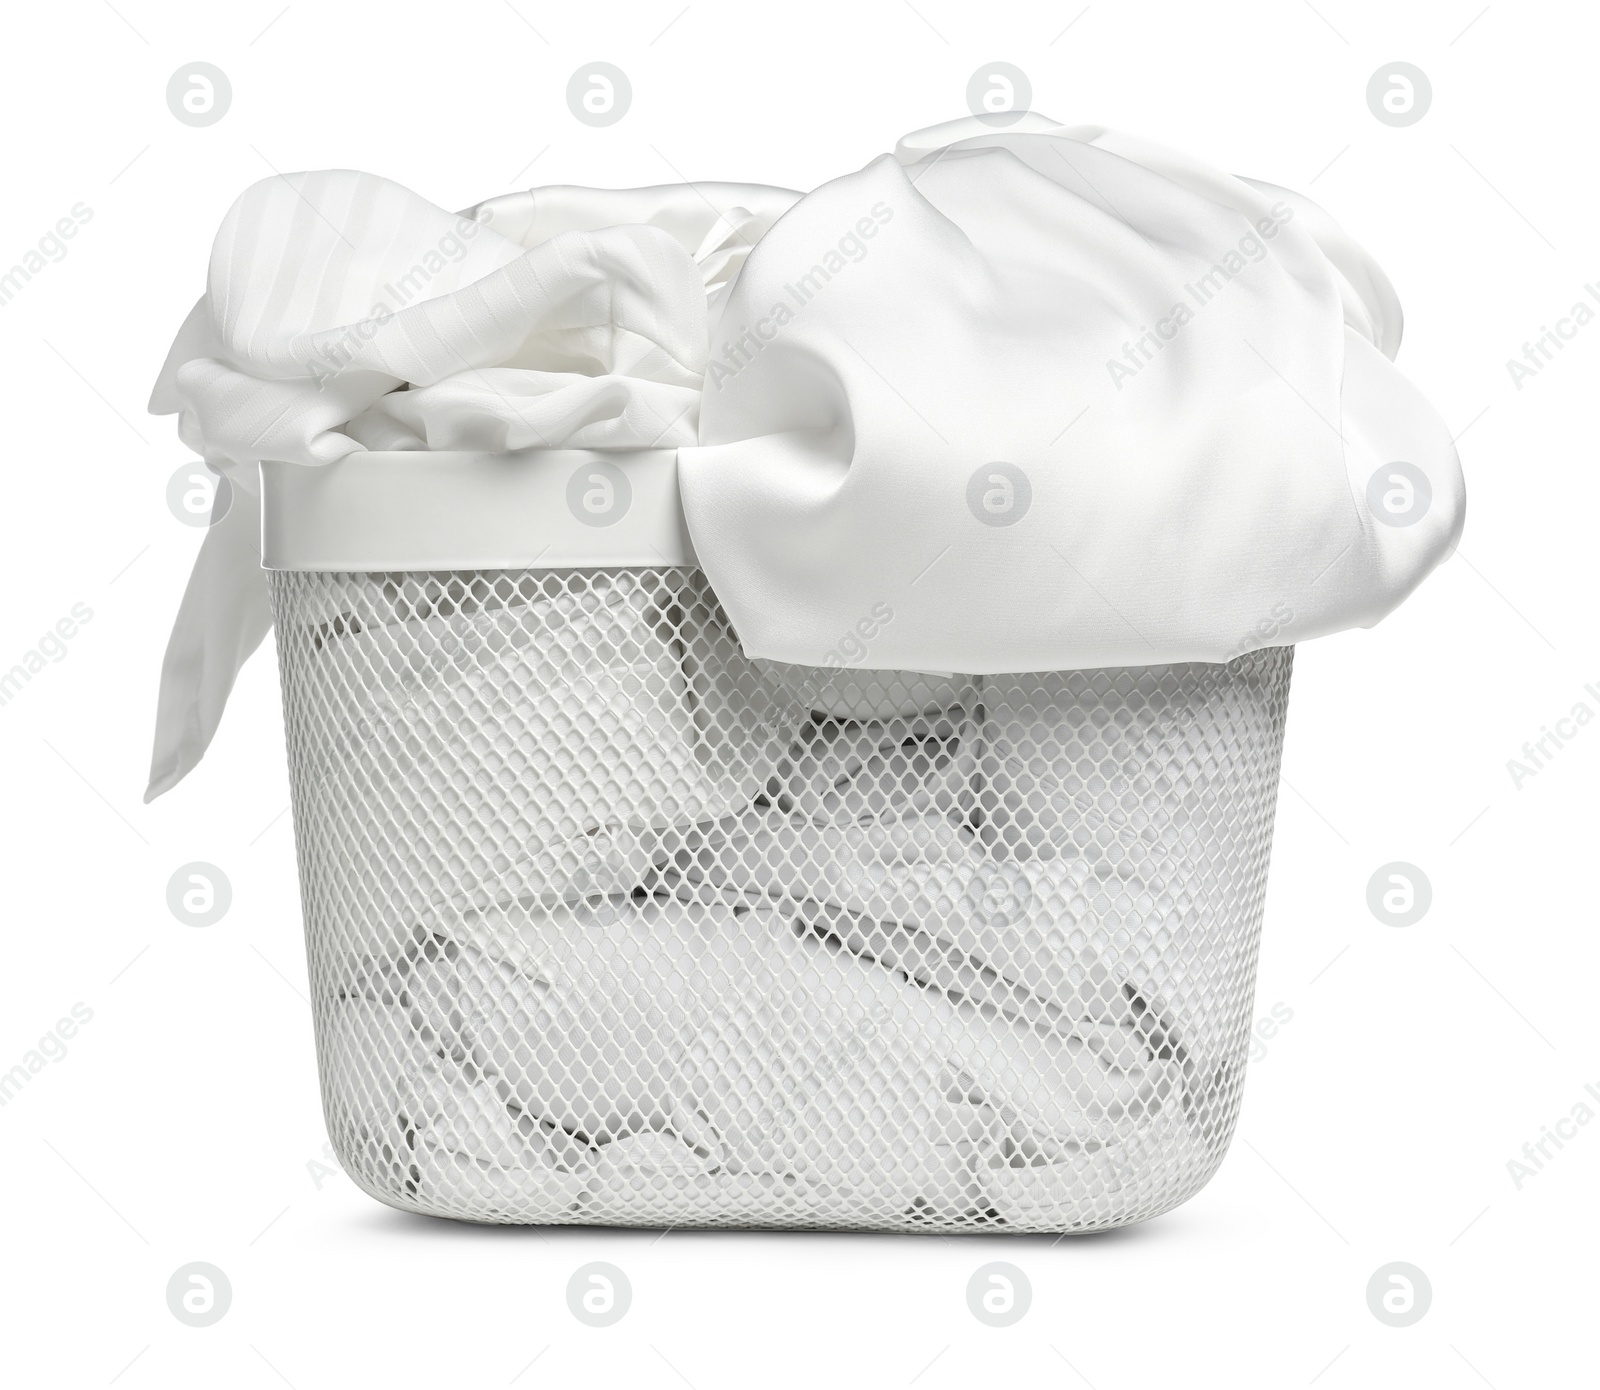 Photo of Laundry basket with clean clothes isolated on white